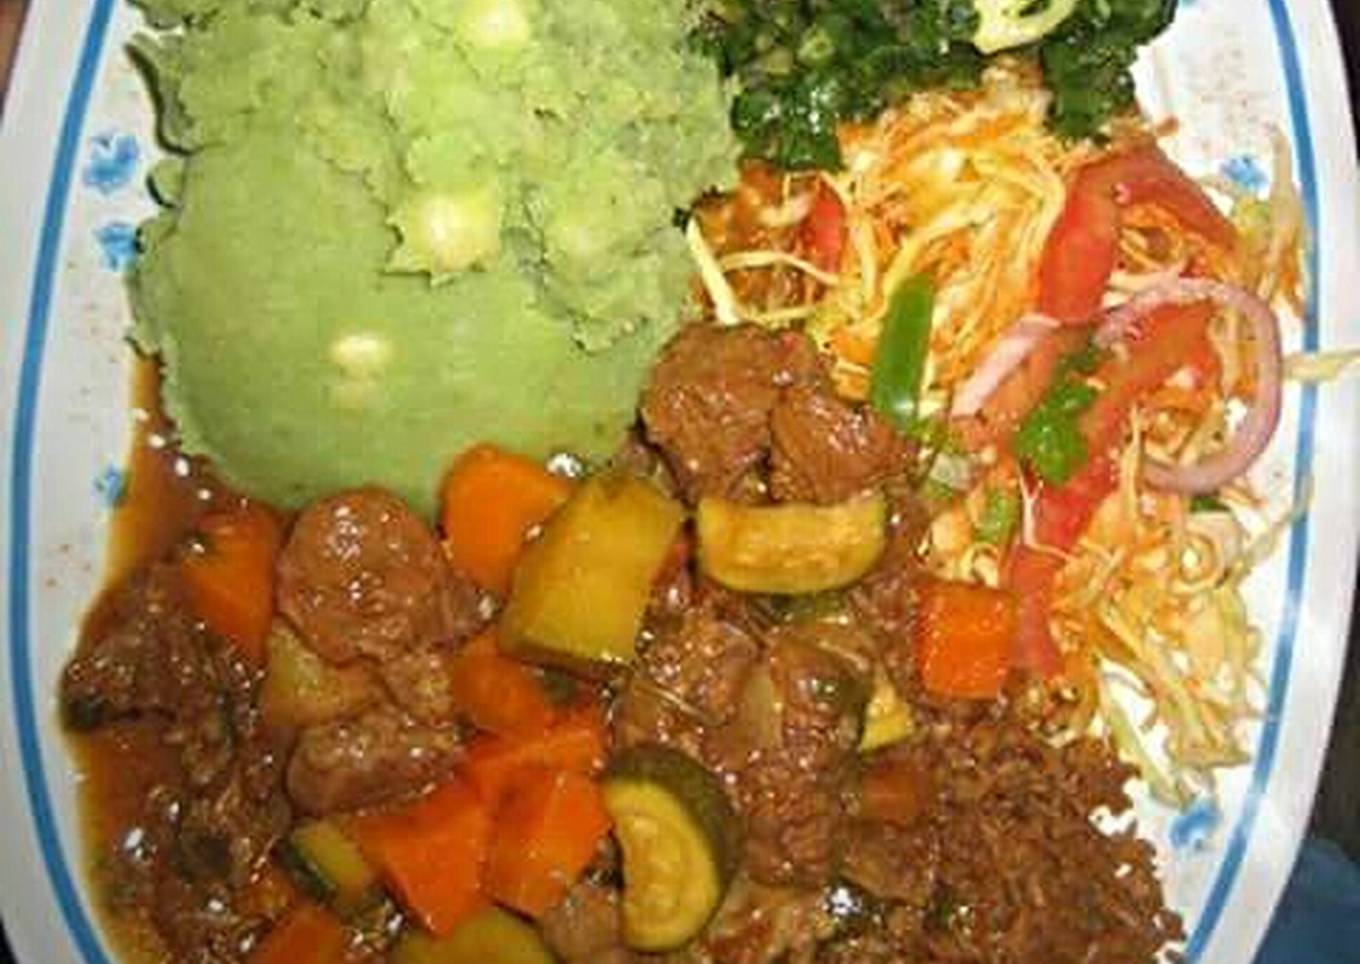 mukimo served with beef stew and green vegetables